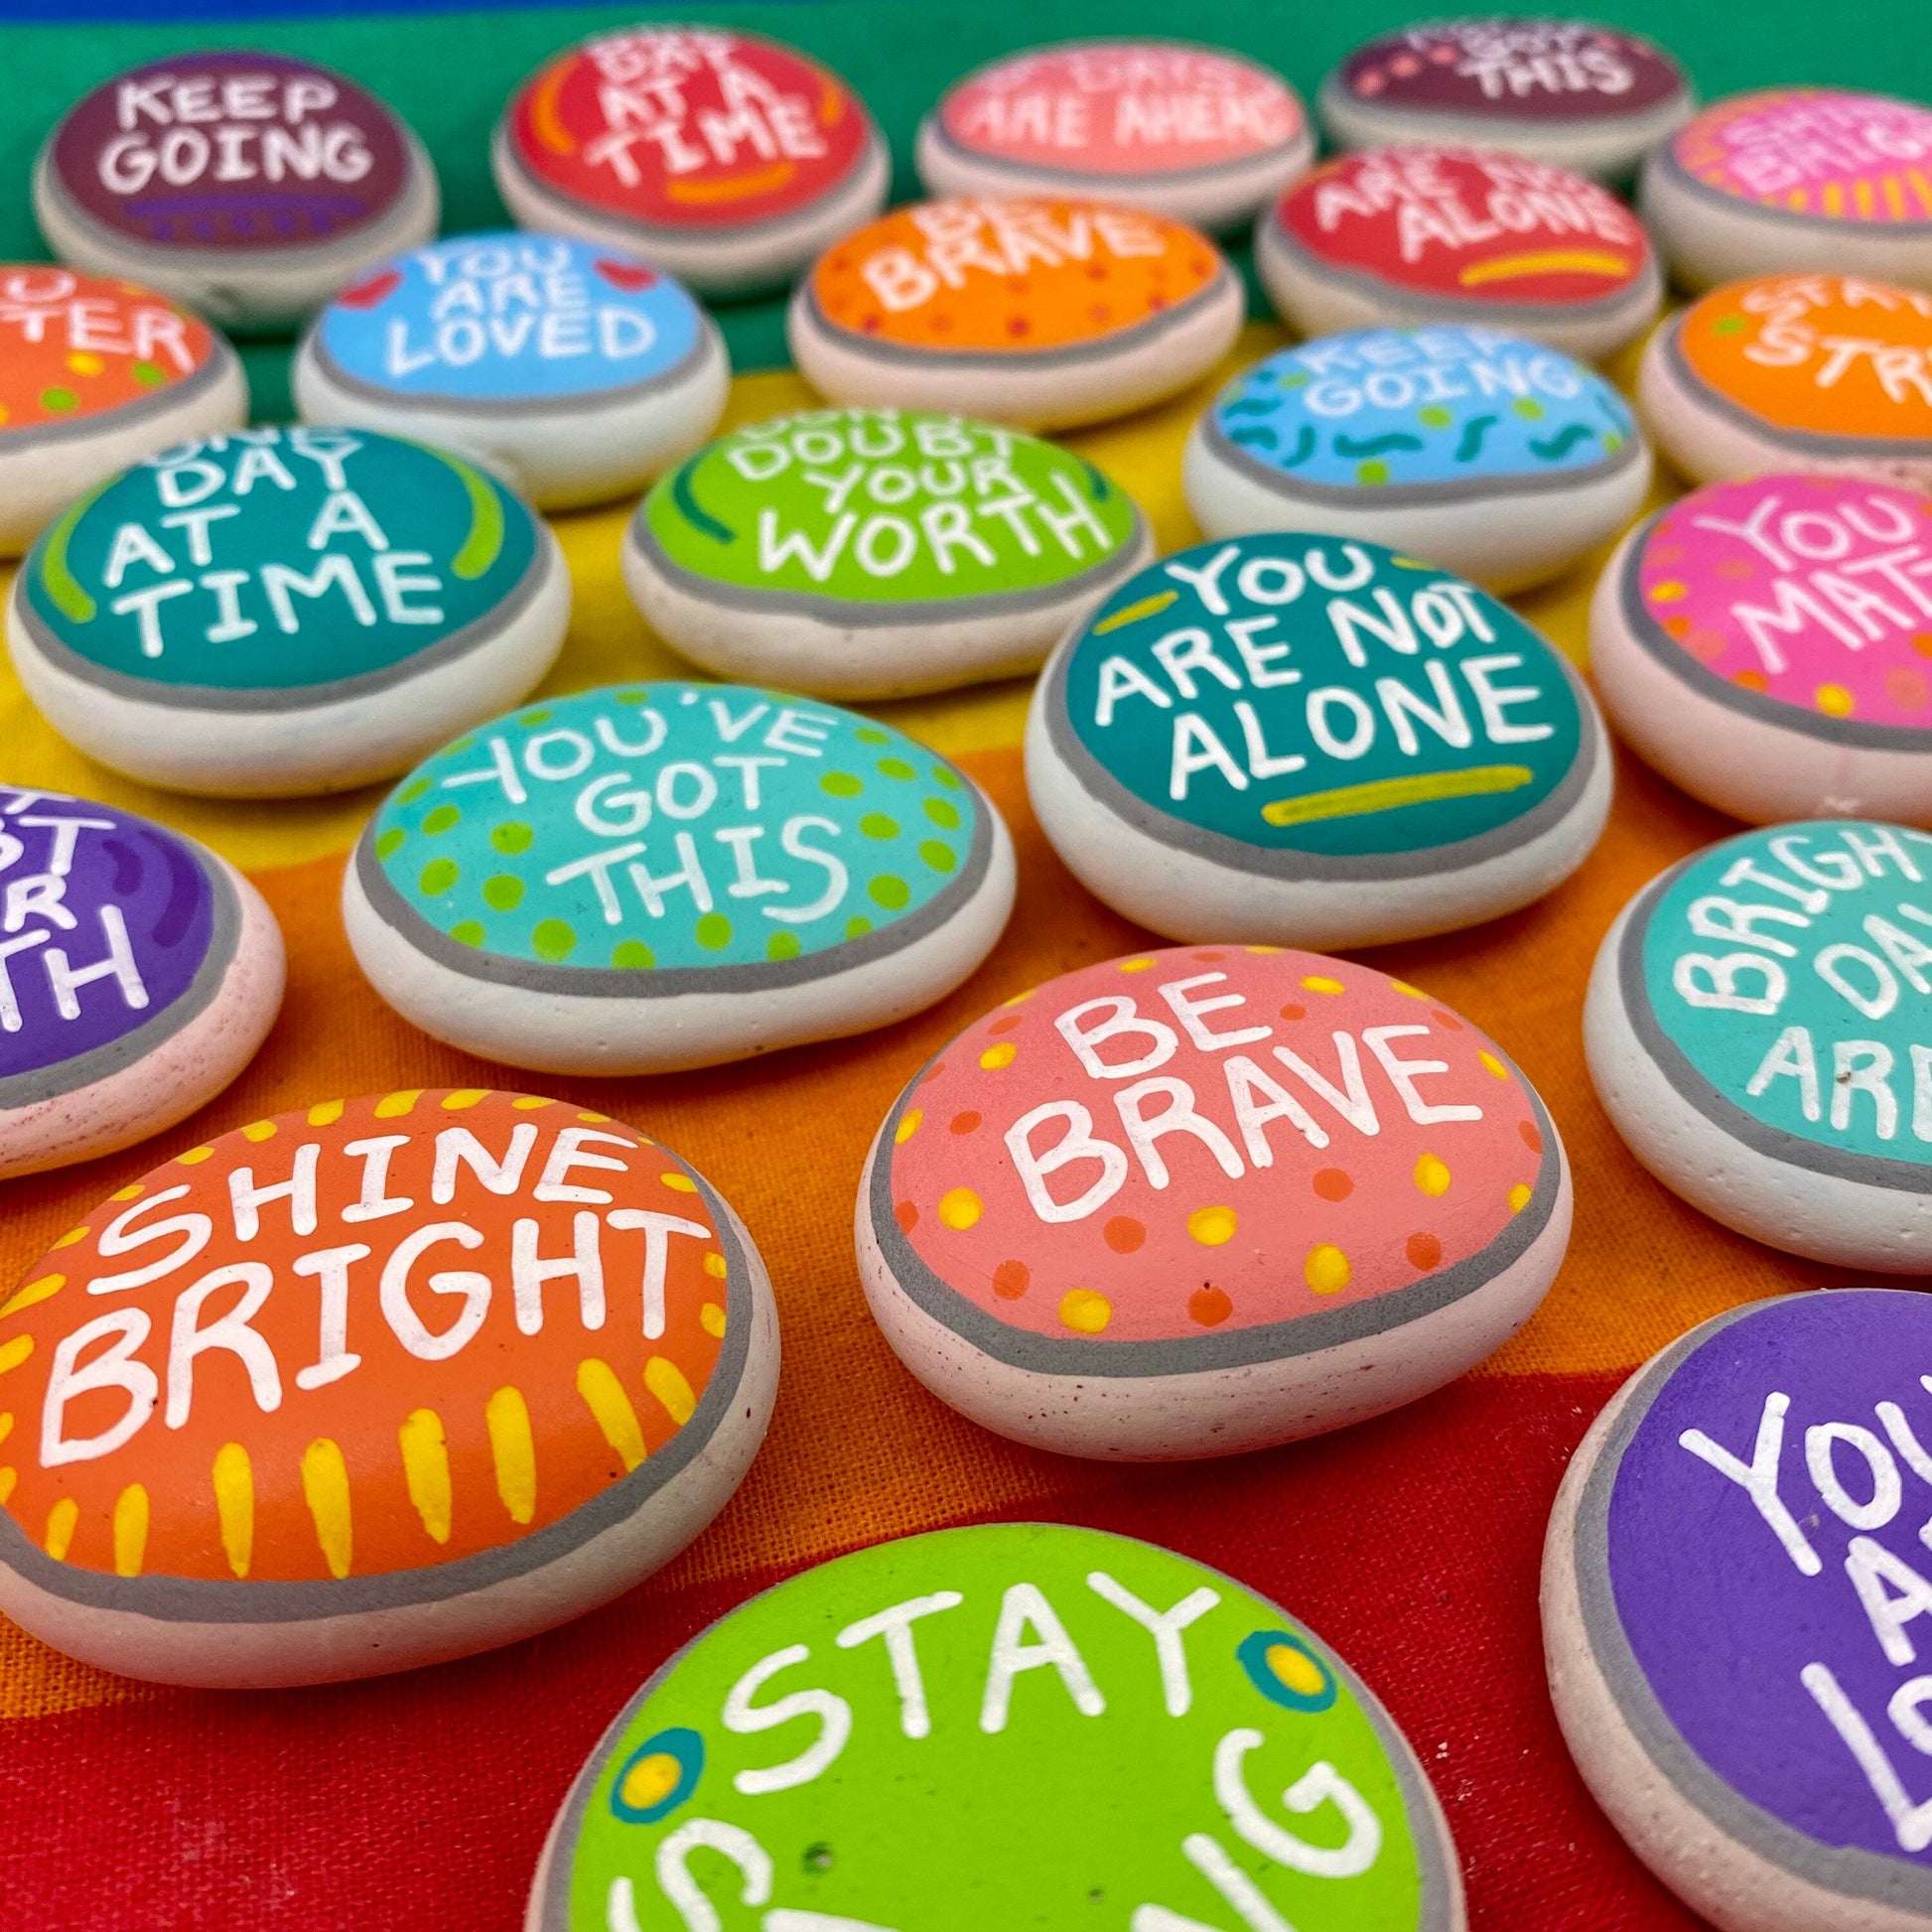 Lots of Colourful Hand painted pebbles with uplifting affirmations written on